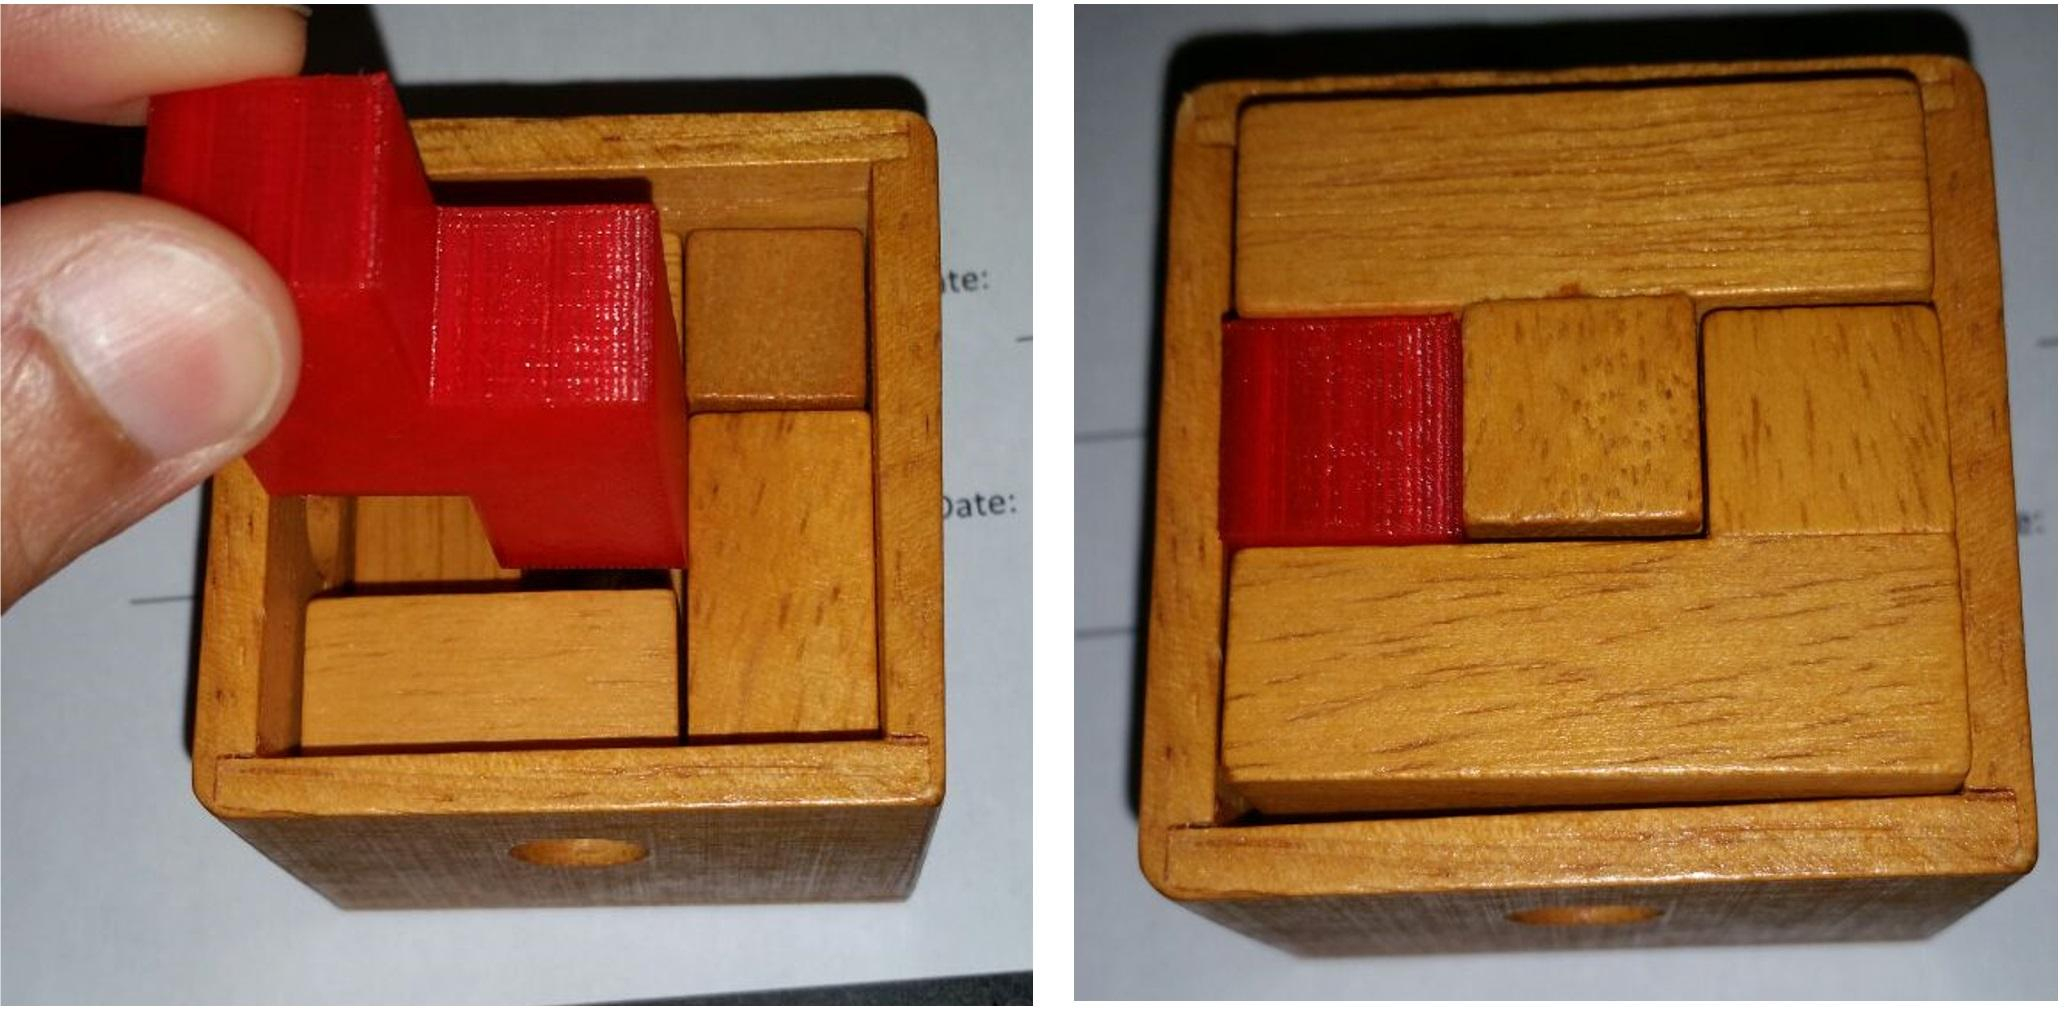 I 3D Printed This Missing Puzzle Piece : Pics - Print Missing Puzzle Piece